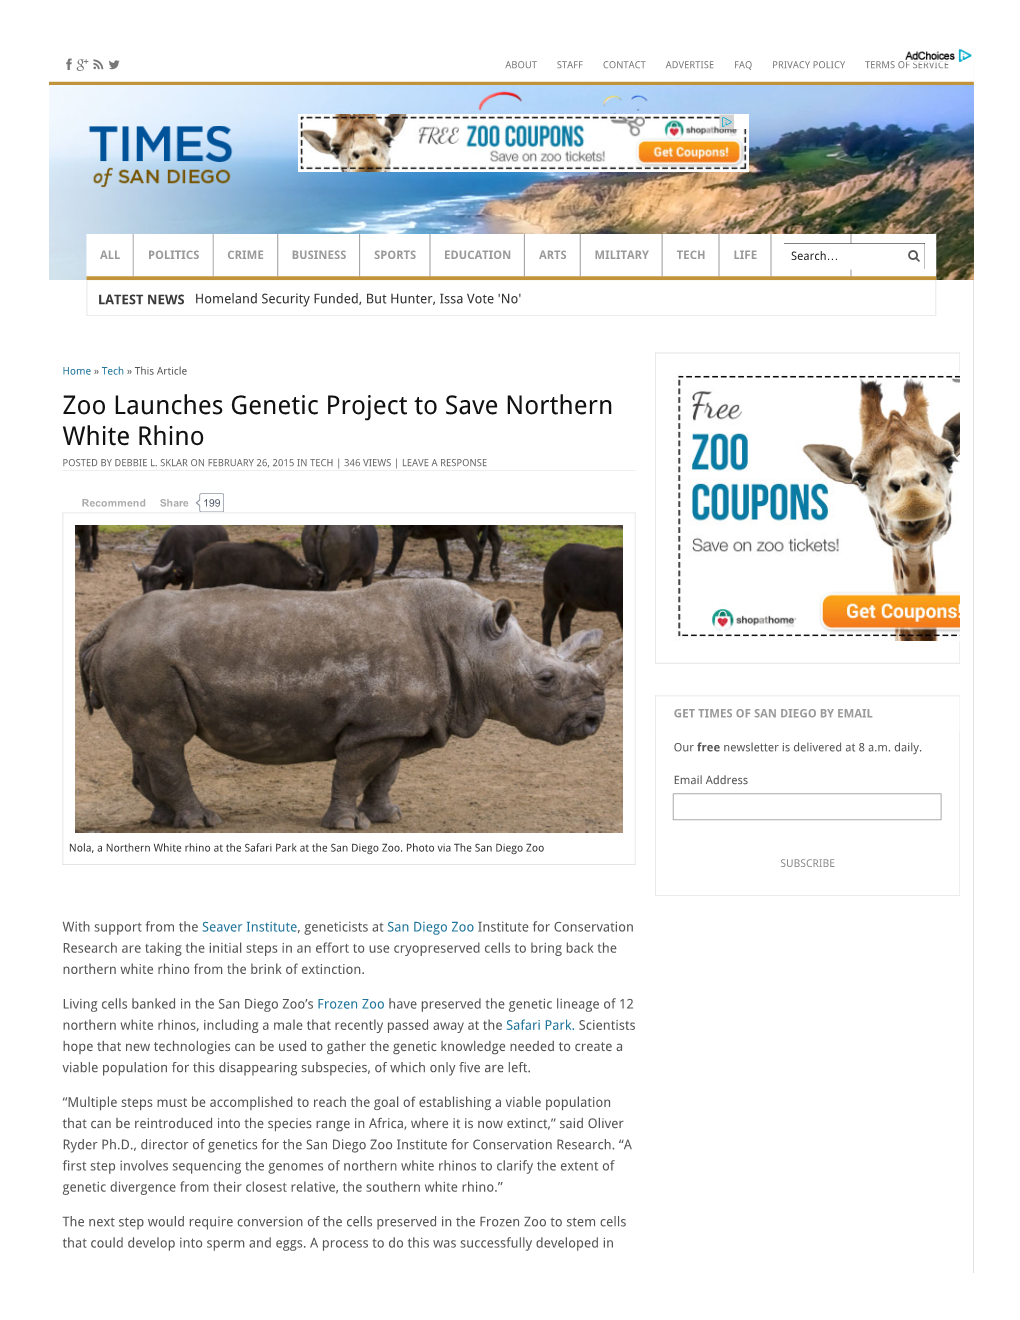 Zoo Launches Genetic Project to Save Northern White Rhino POSTED by DEBBIE L